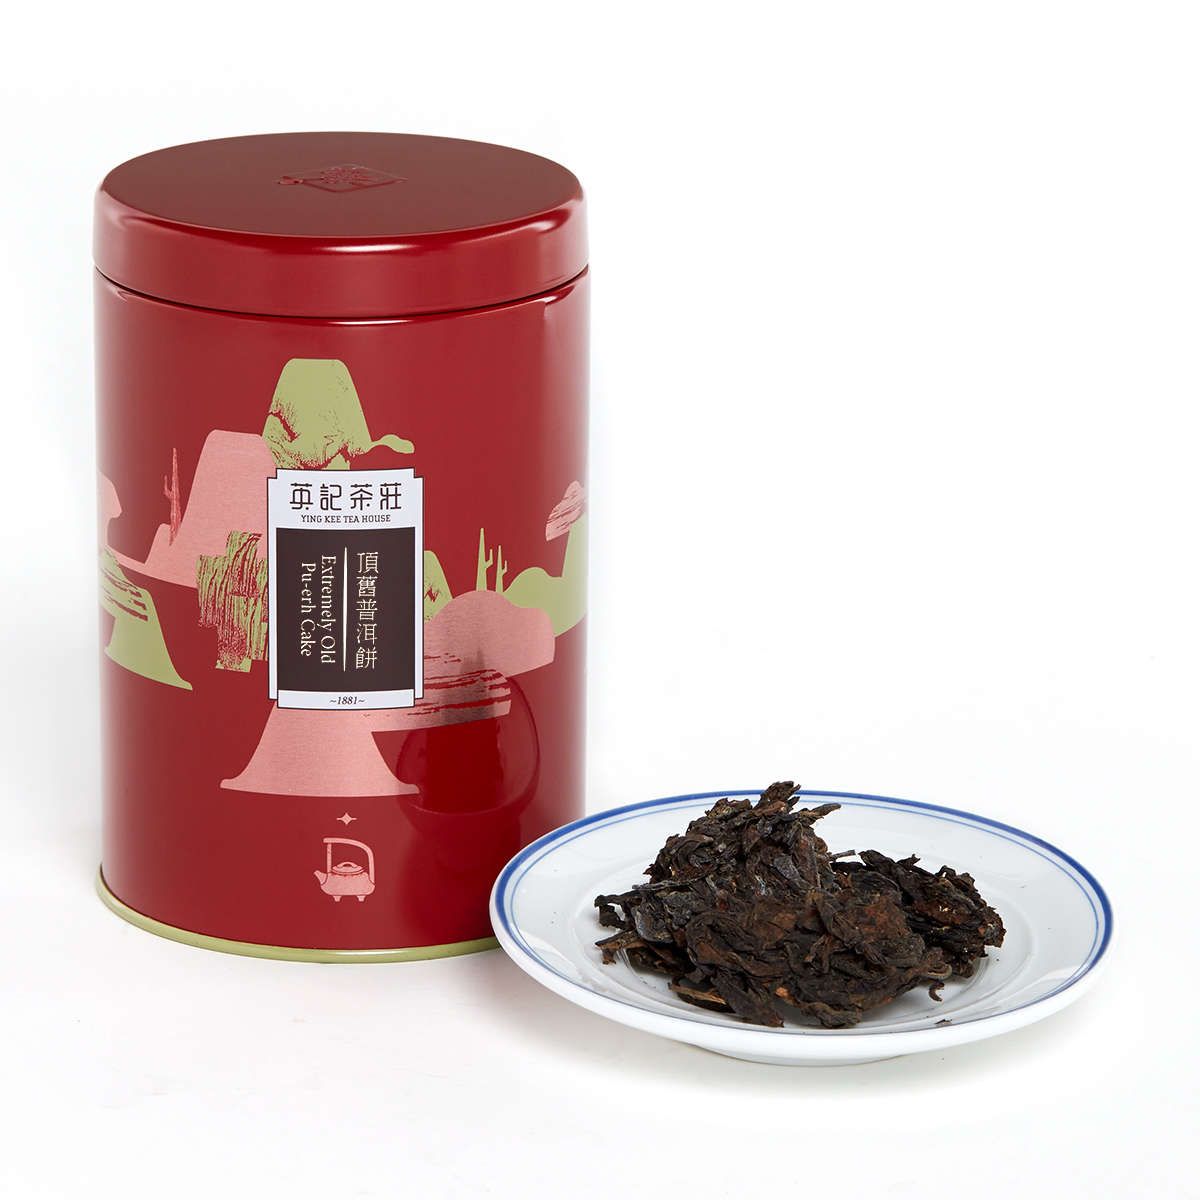 Ying Kee Tea House Extremely Old Pu-erh Cake (Canned) 英記茶莊 頂舊普洱餅 (罐裝)